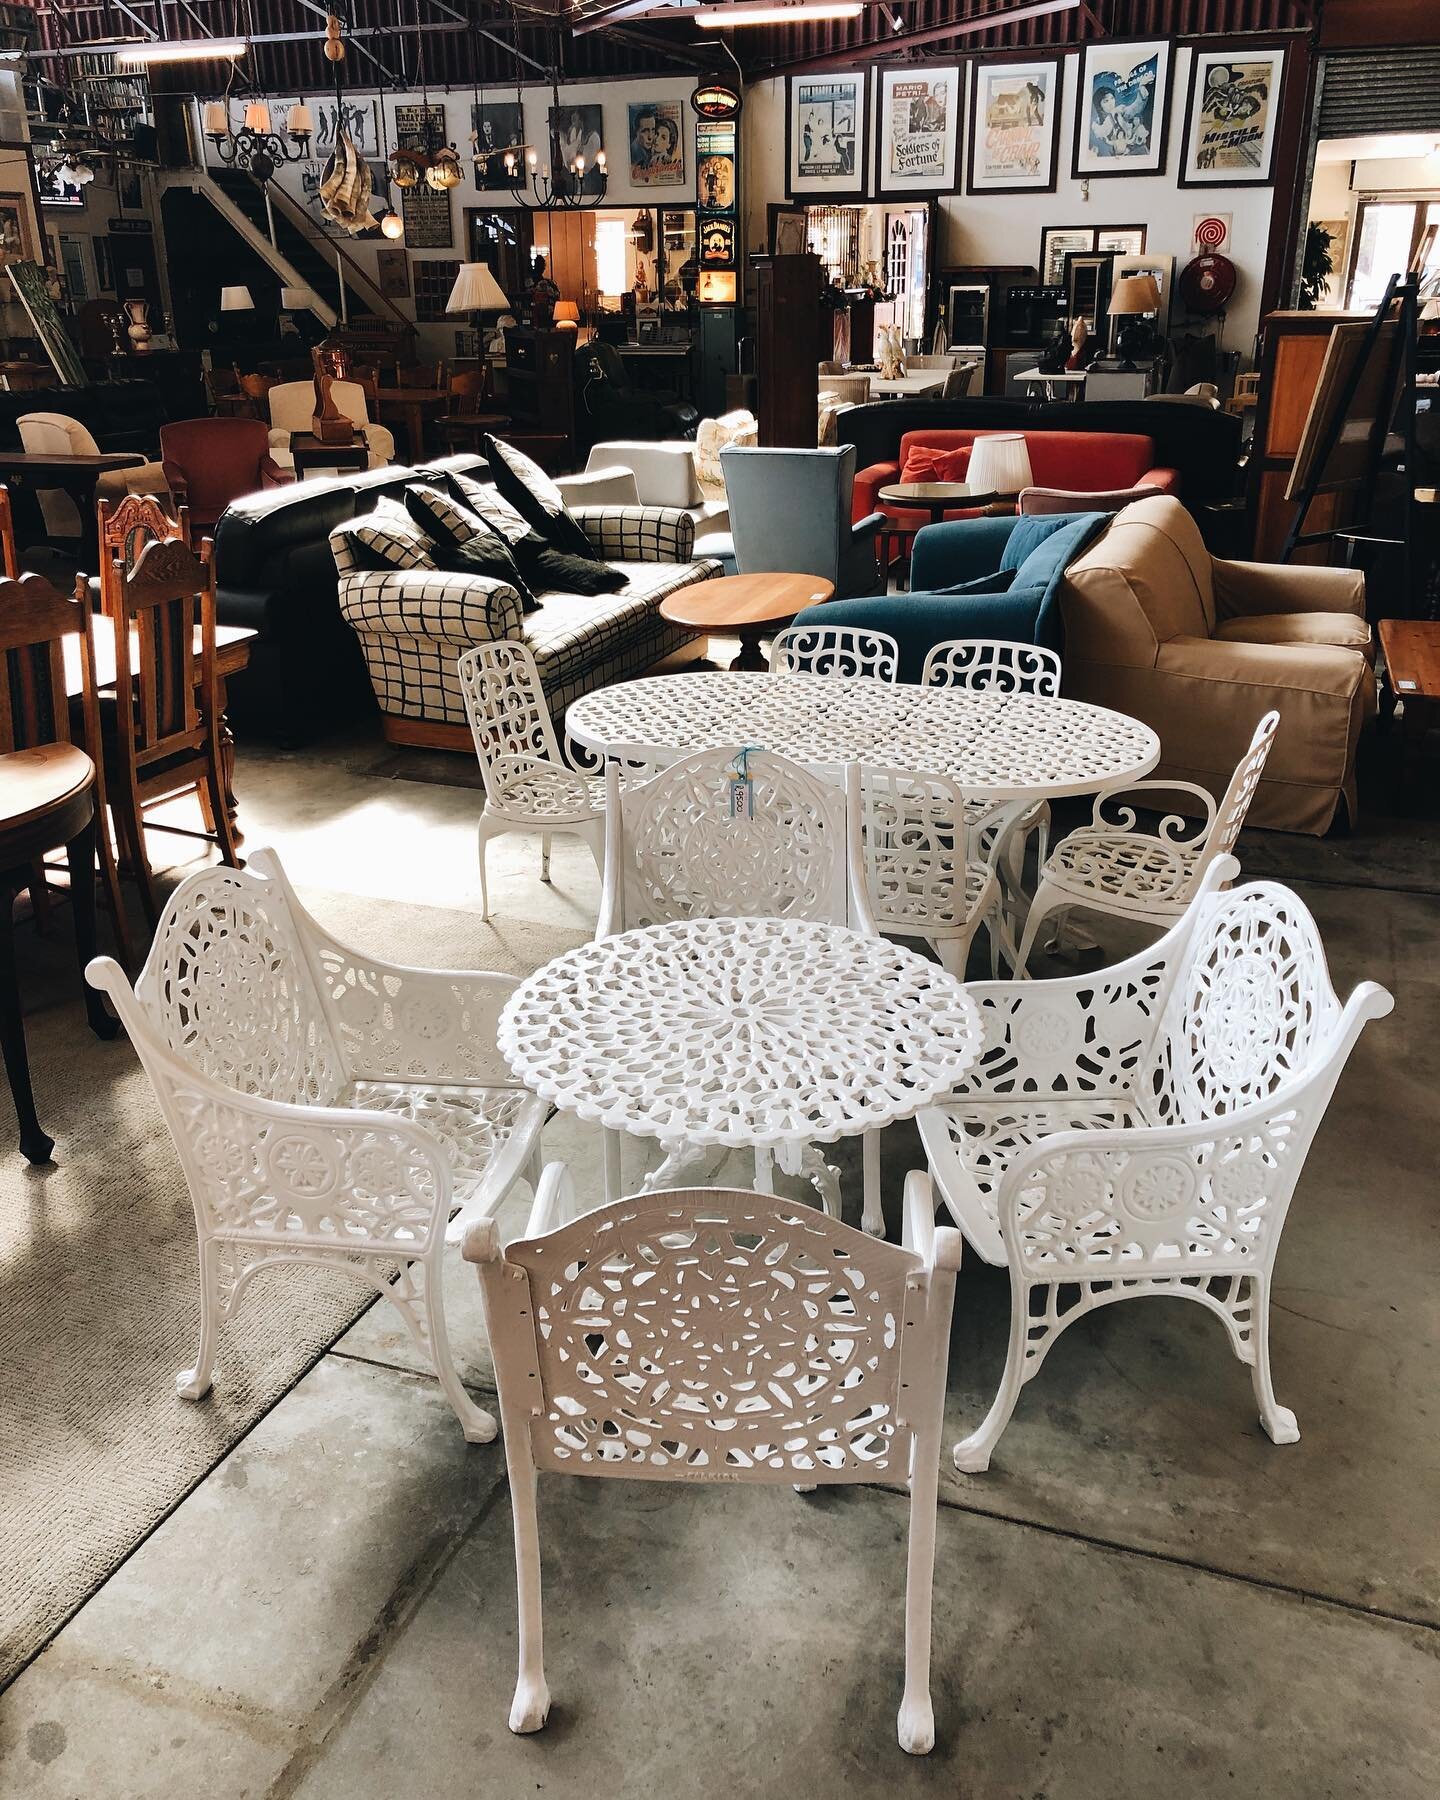 We&rsquo;ve got some really great outdoor furniture in the shop at the moment, like these two good-condition, cast iron sets:

4x Falkirk Cast Iron Chairs with Table
Price: R9500 (set)
Diameter: 800mm
Height: 680mm

6x Seater Cast Iron Patio Set
Pric